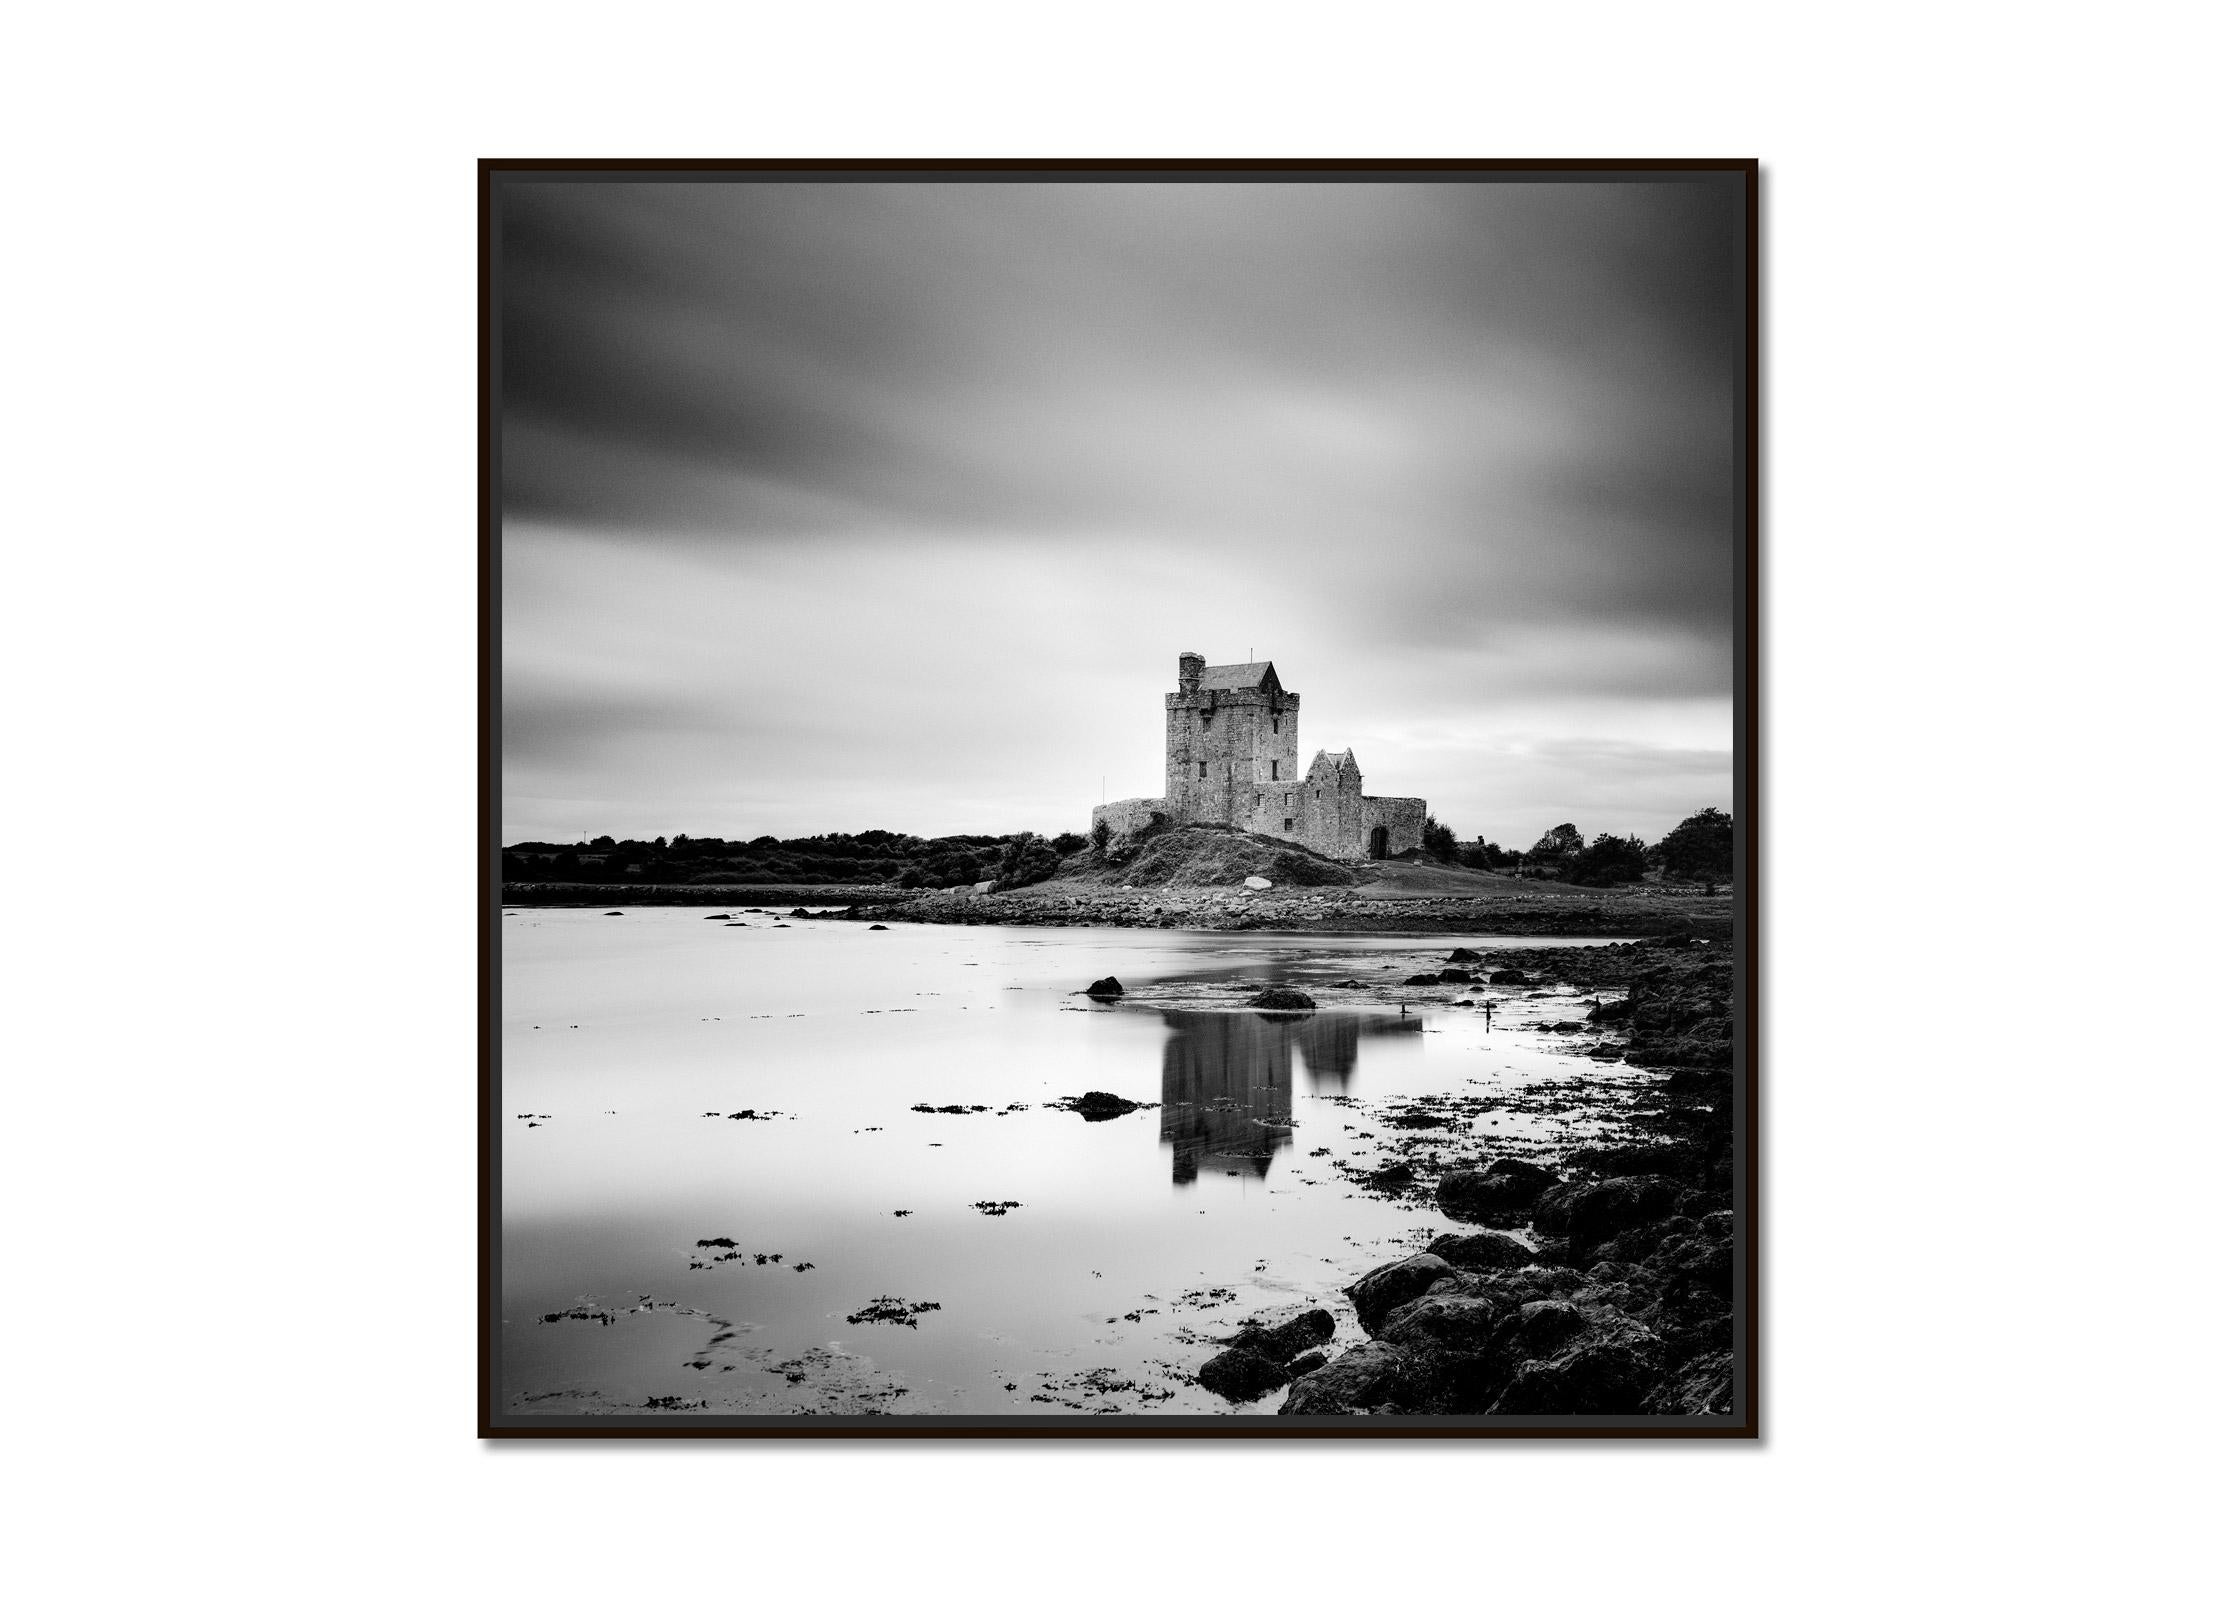 Dunguaire Castle, Ireland, black and white, long exposure, landscape photography - Photograph by Gerald Berghammer